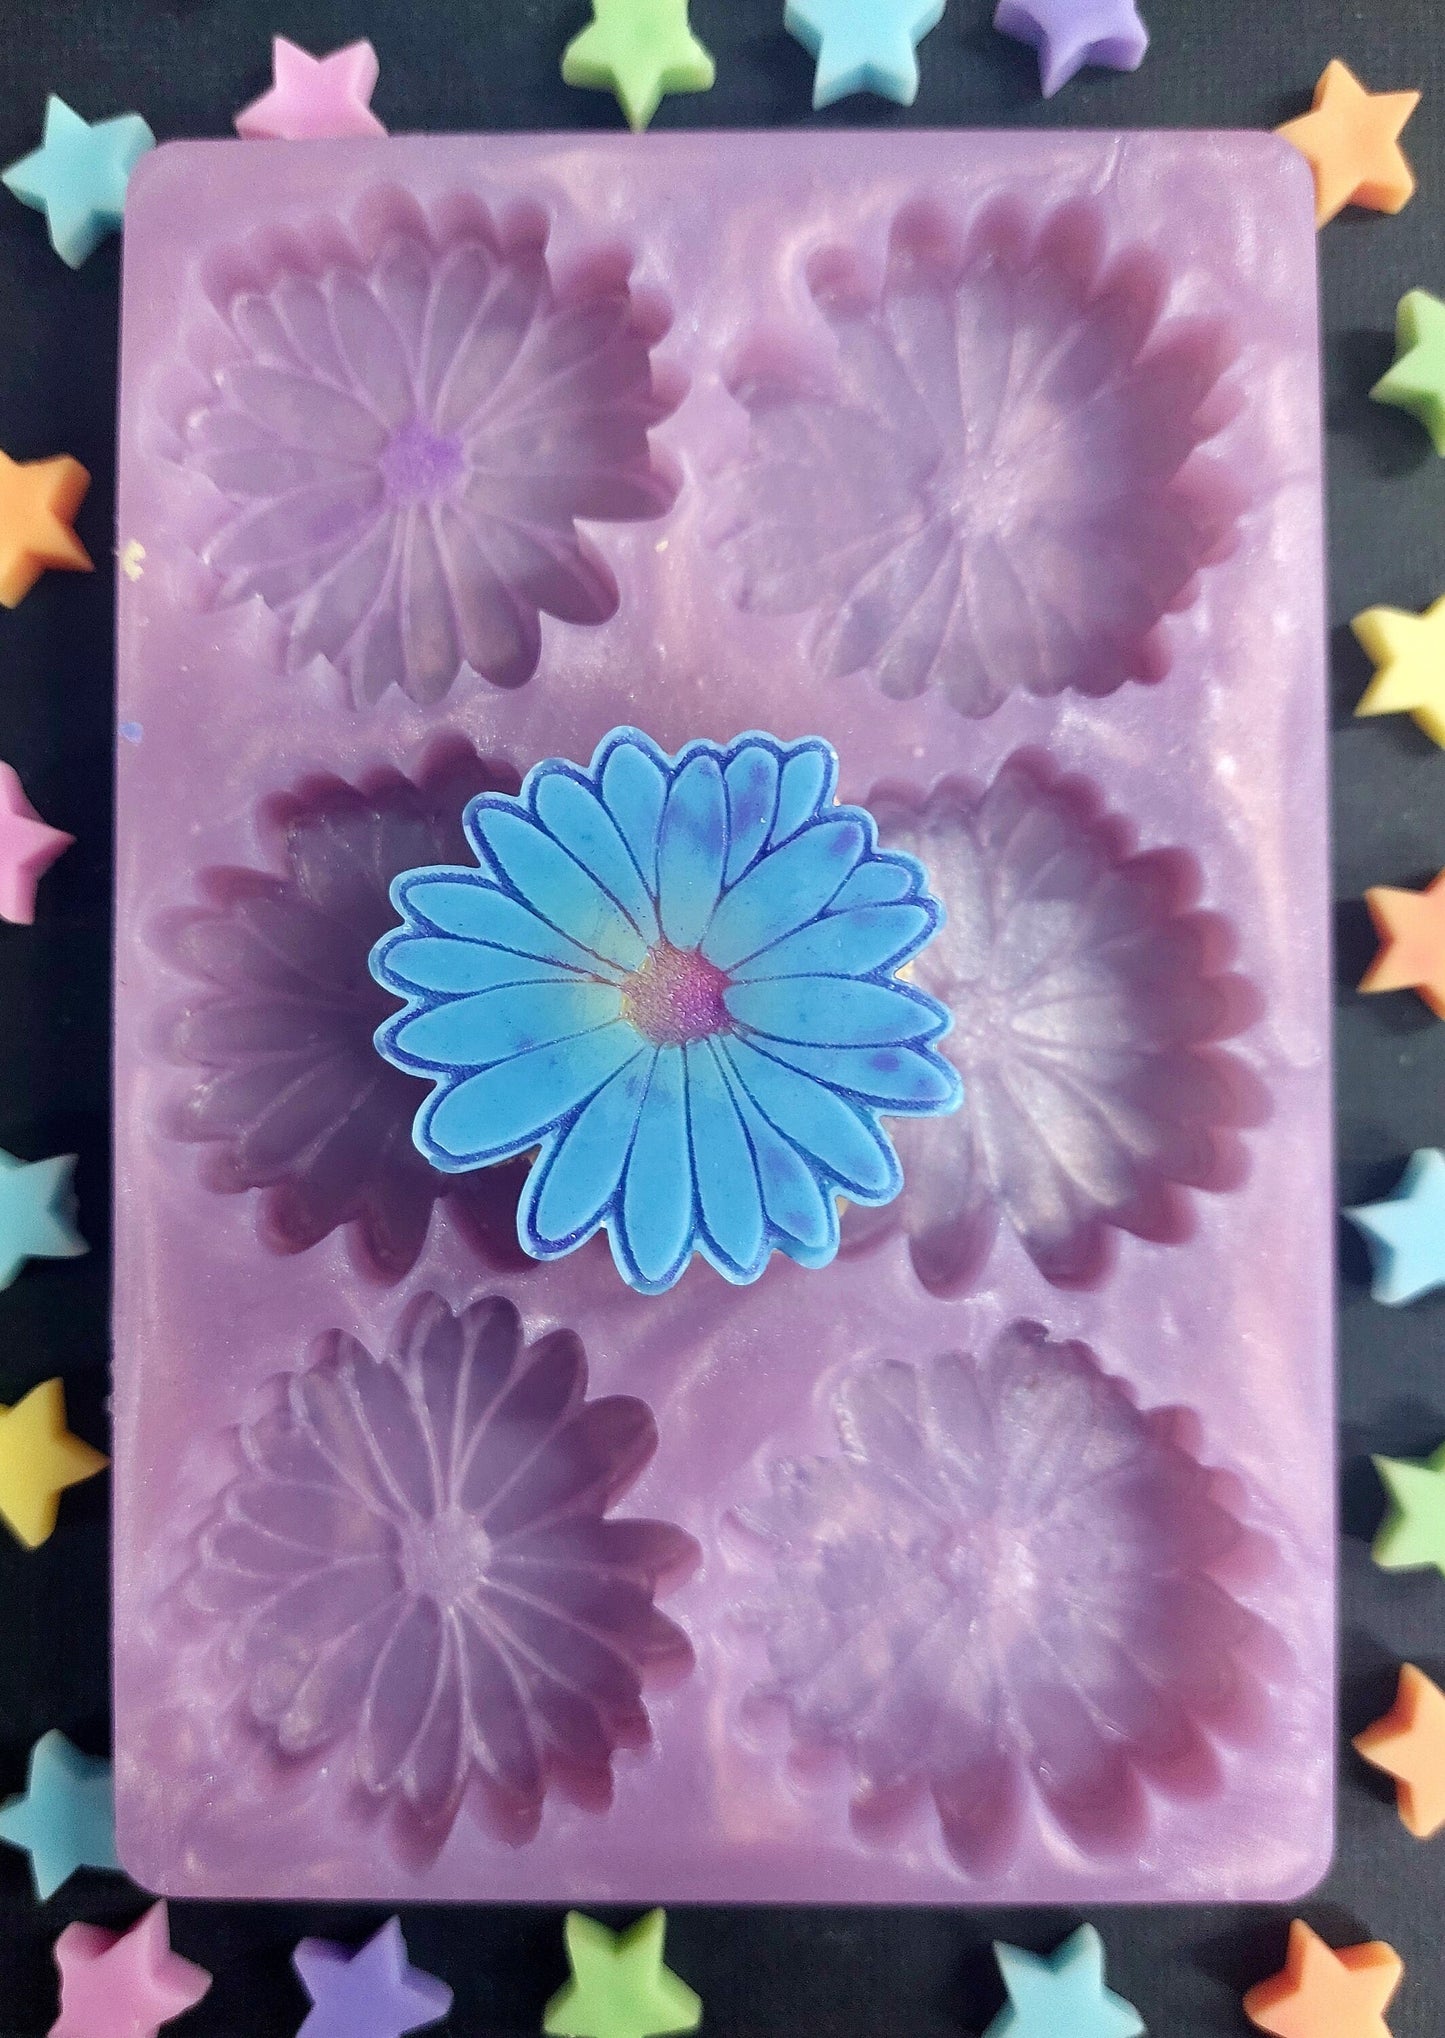 Daisy 6 Piece Flower Silicone Mould for wax, resin, soap etc